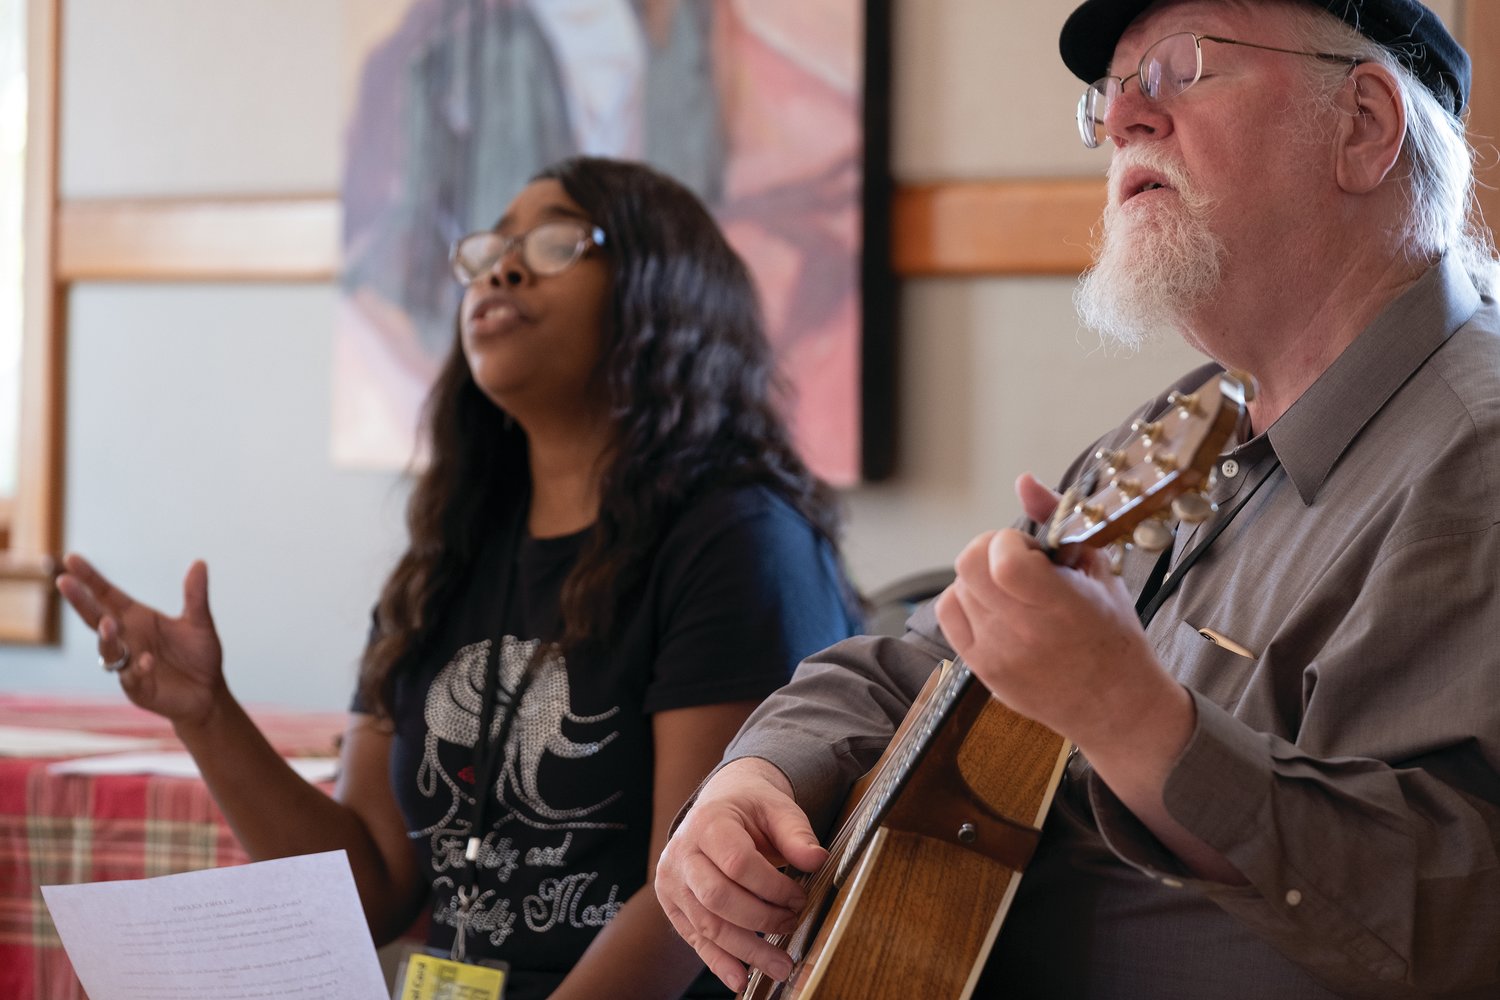 The Acoustic Blues workshops will take place virtually with a live concert at the end.